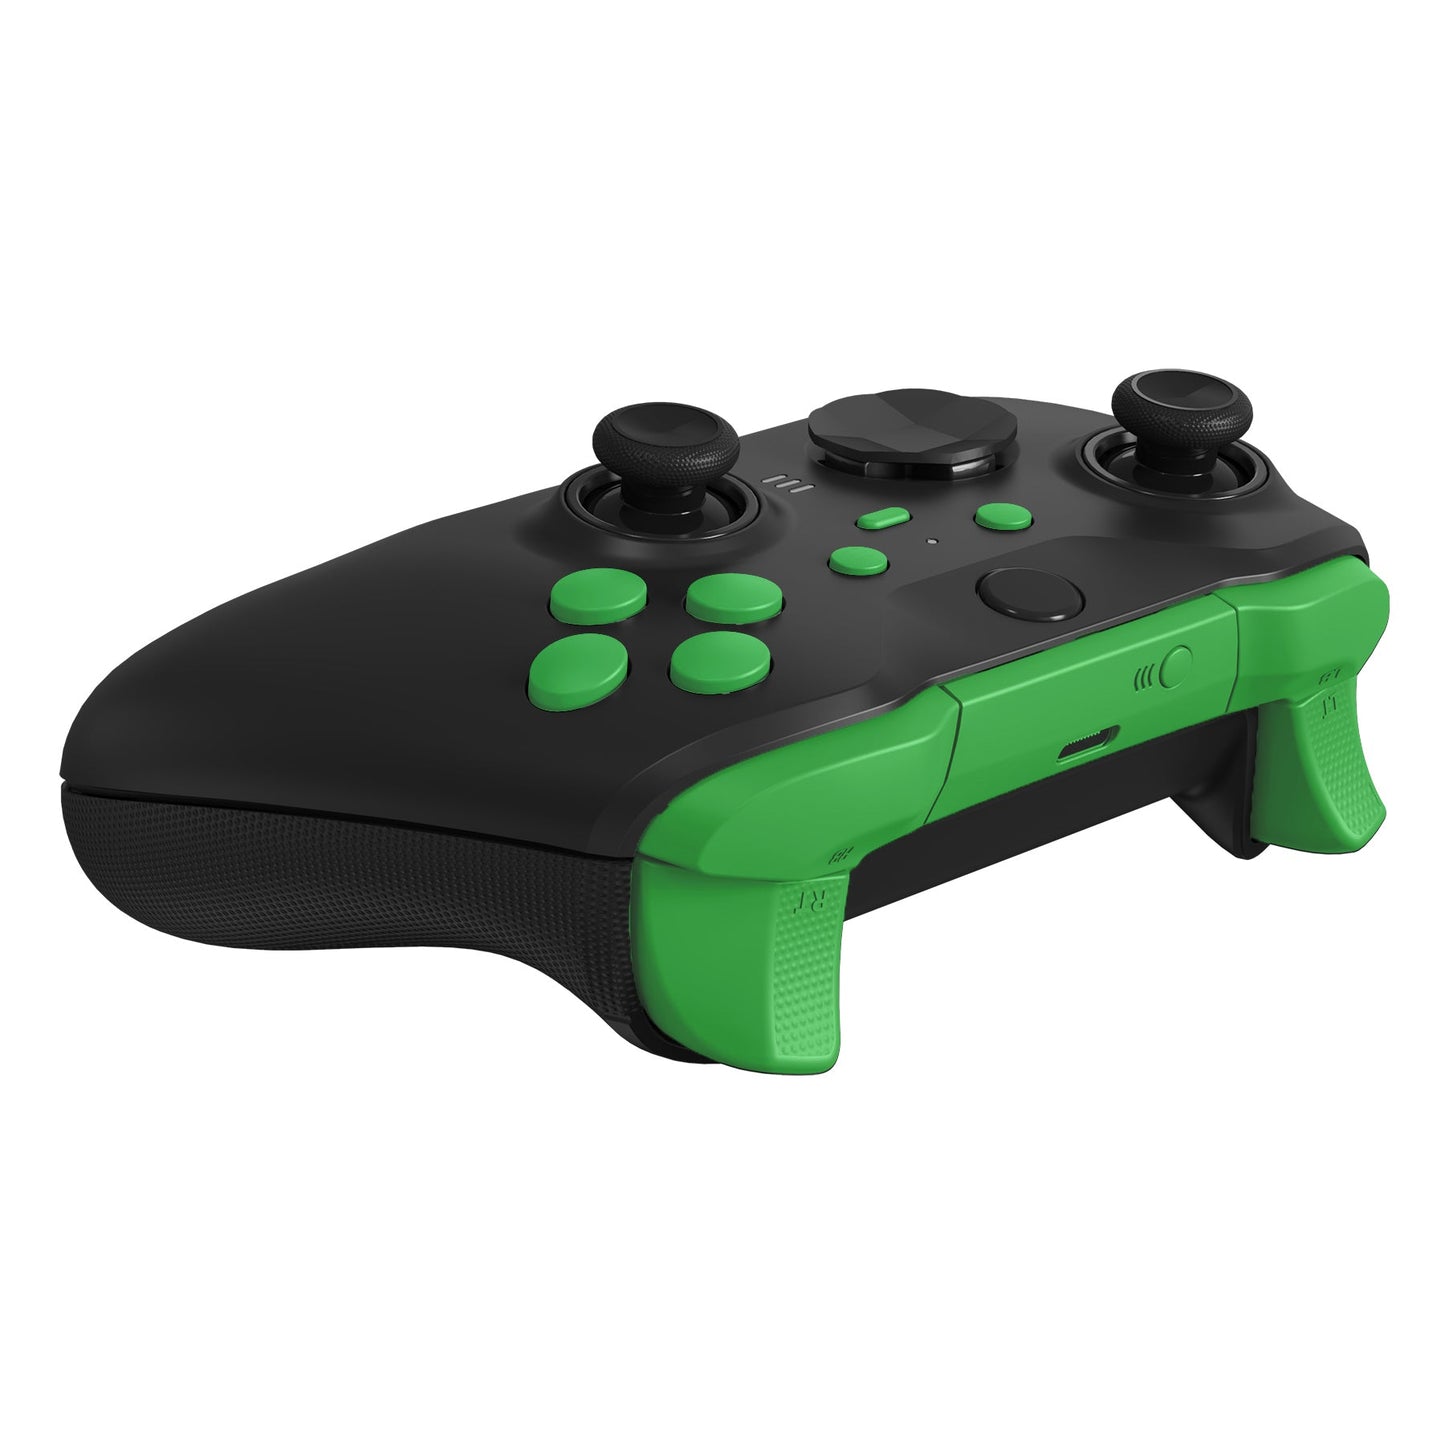 eXtremeRate Retail Green Replacement Buttons for Xbox One Elite Series 2 Controller, LB RB LT RT Bumpers Triggers ABXY Start Back Sync Profile Switch Keys for Xbox One Elite V2 Controller (Model 1797 and Core Model 1797) - IL106